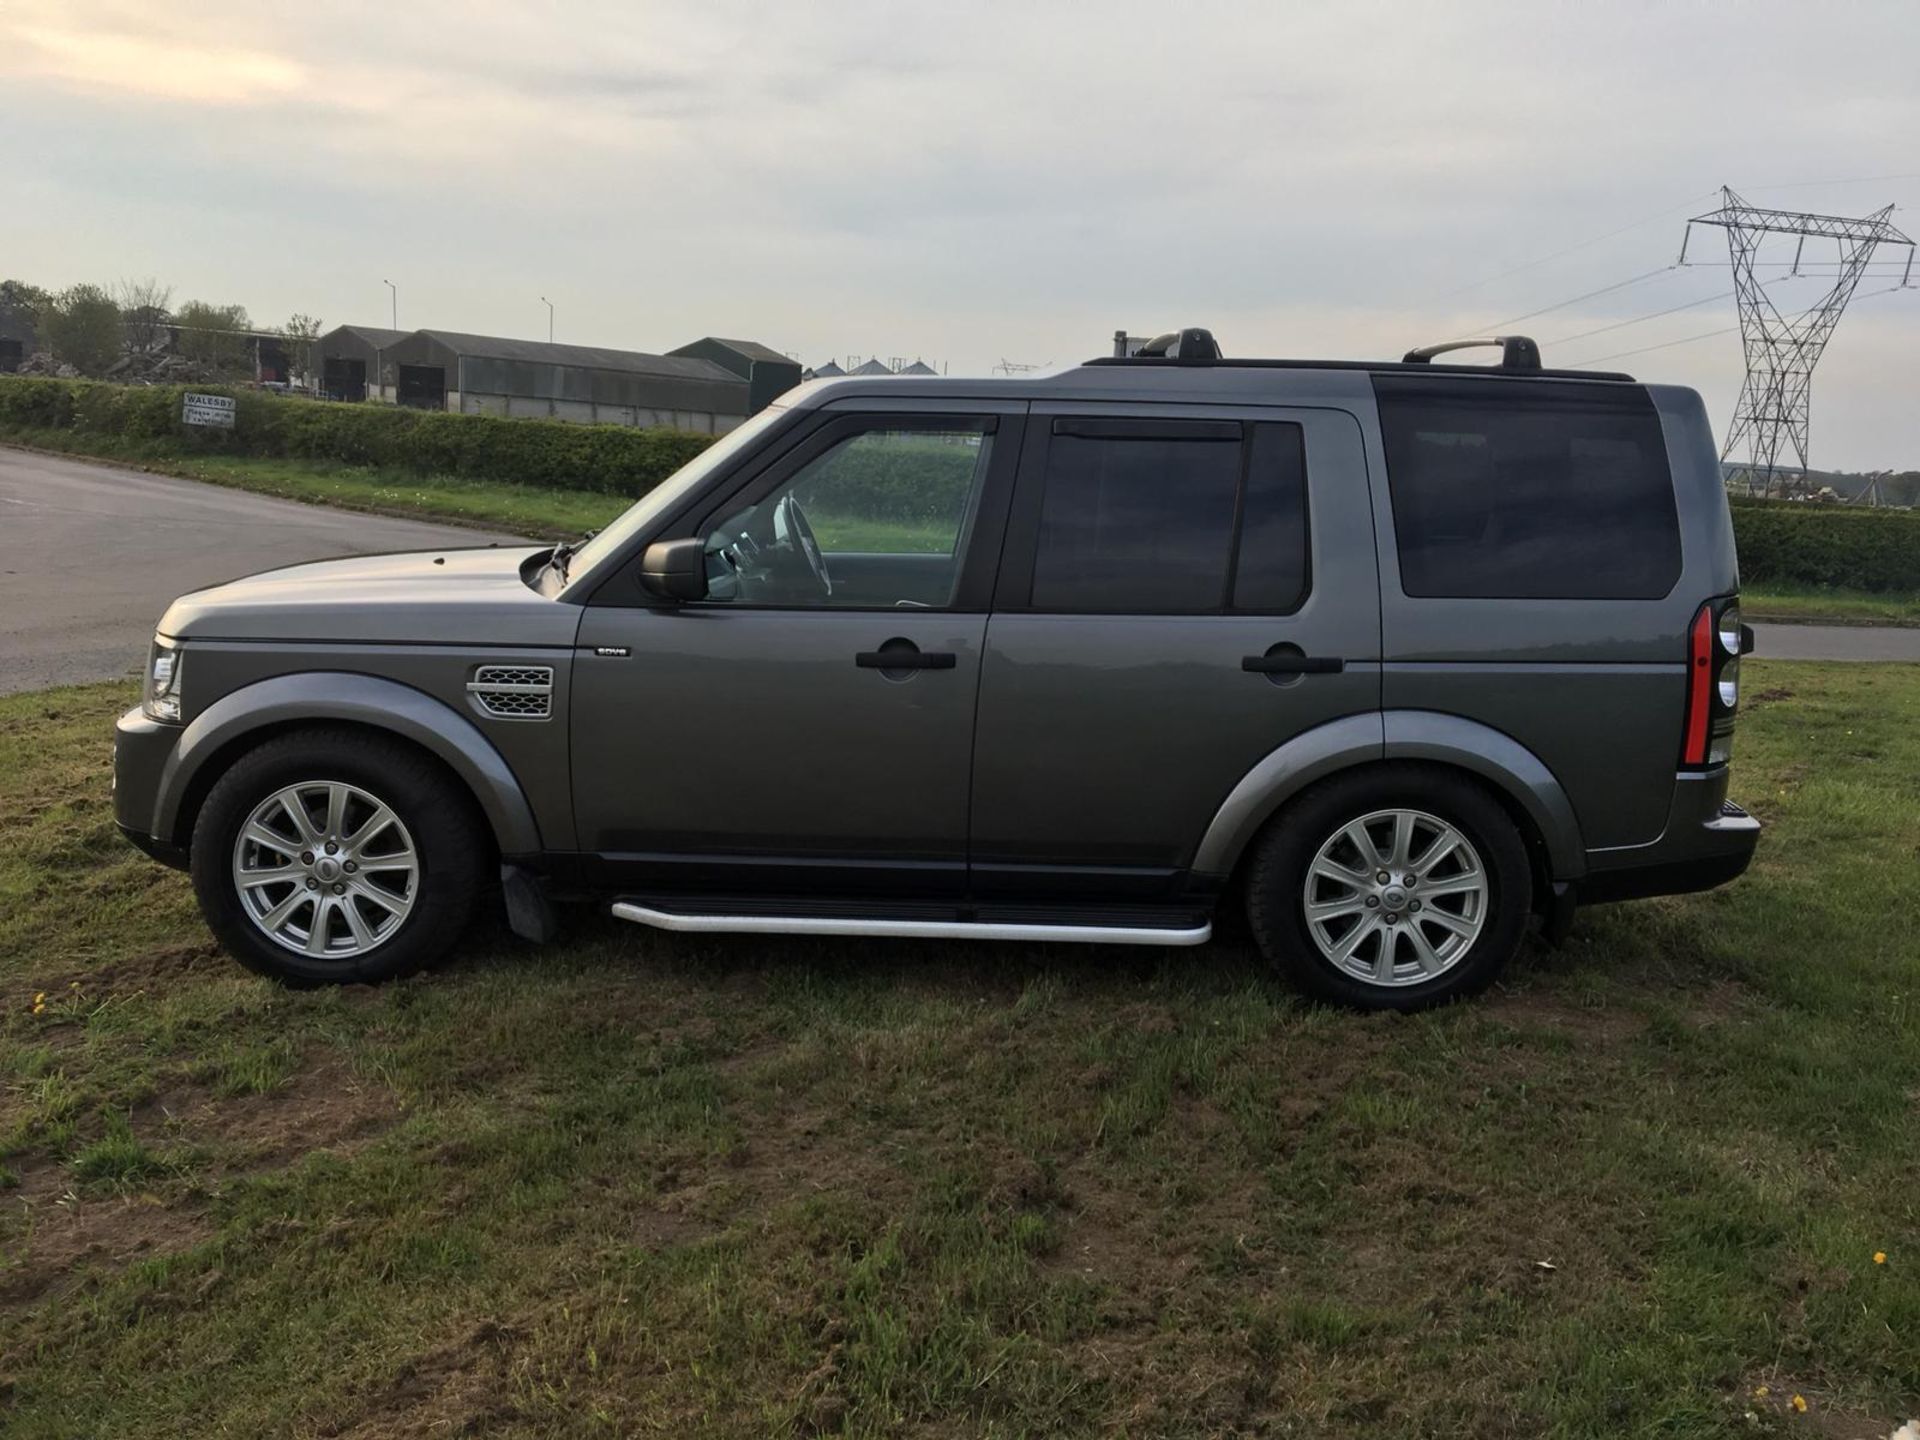 2007/07 REG LAND ROVER DISCOVERY 3 TDV6 SE AUTOMATIC 2.7 DIESEL 4X4, 7 SEAT FACELIFT LIGHTS *NO VAT* - Image 5 of 16